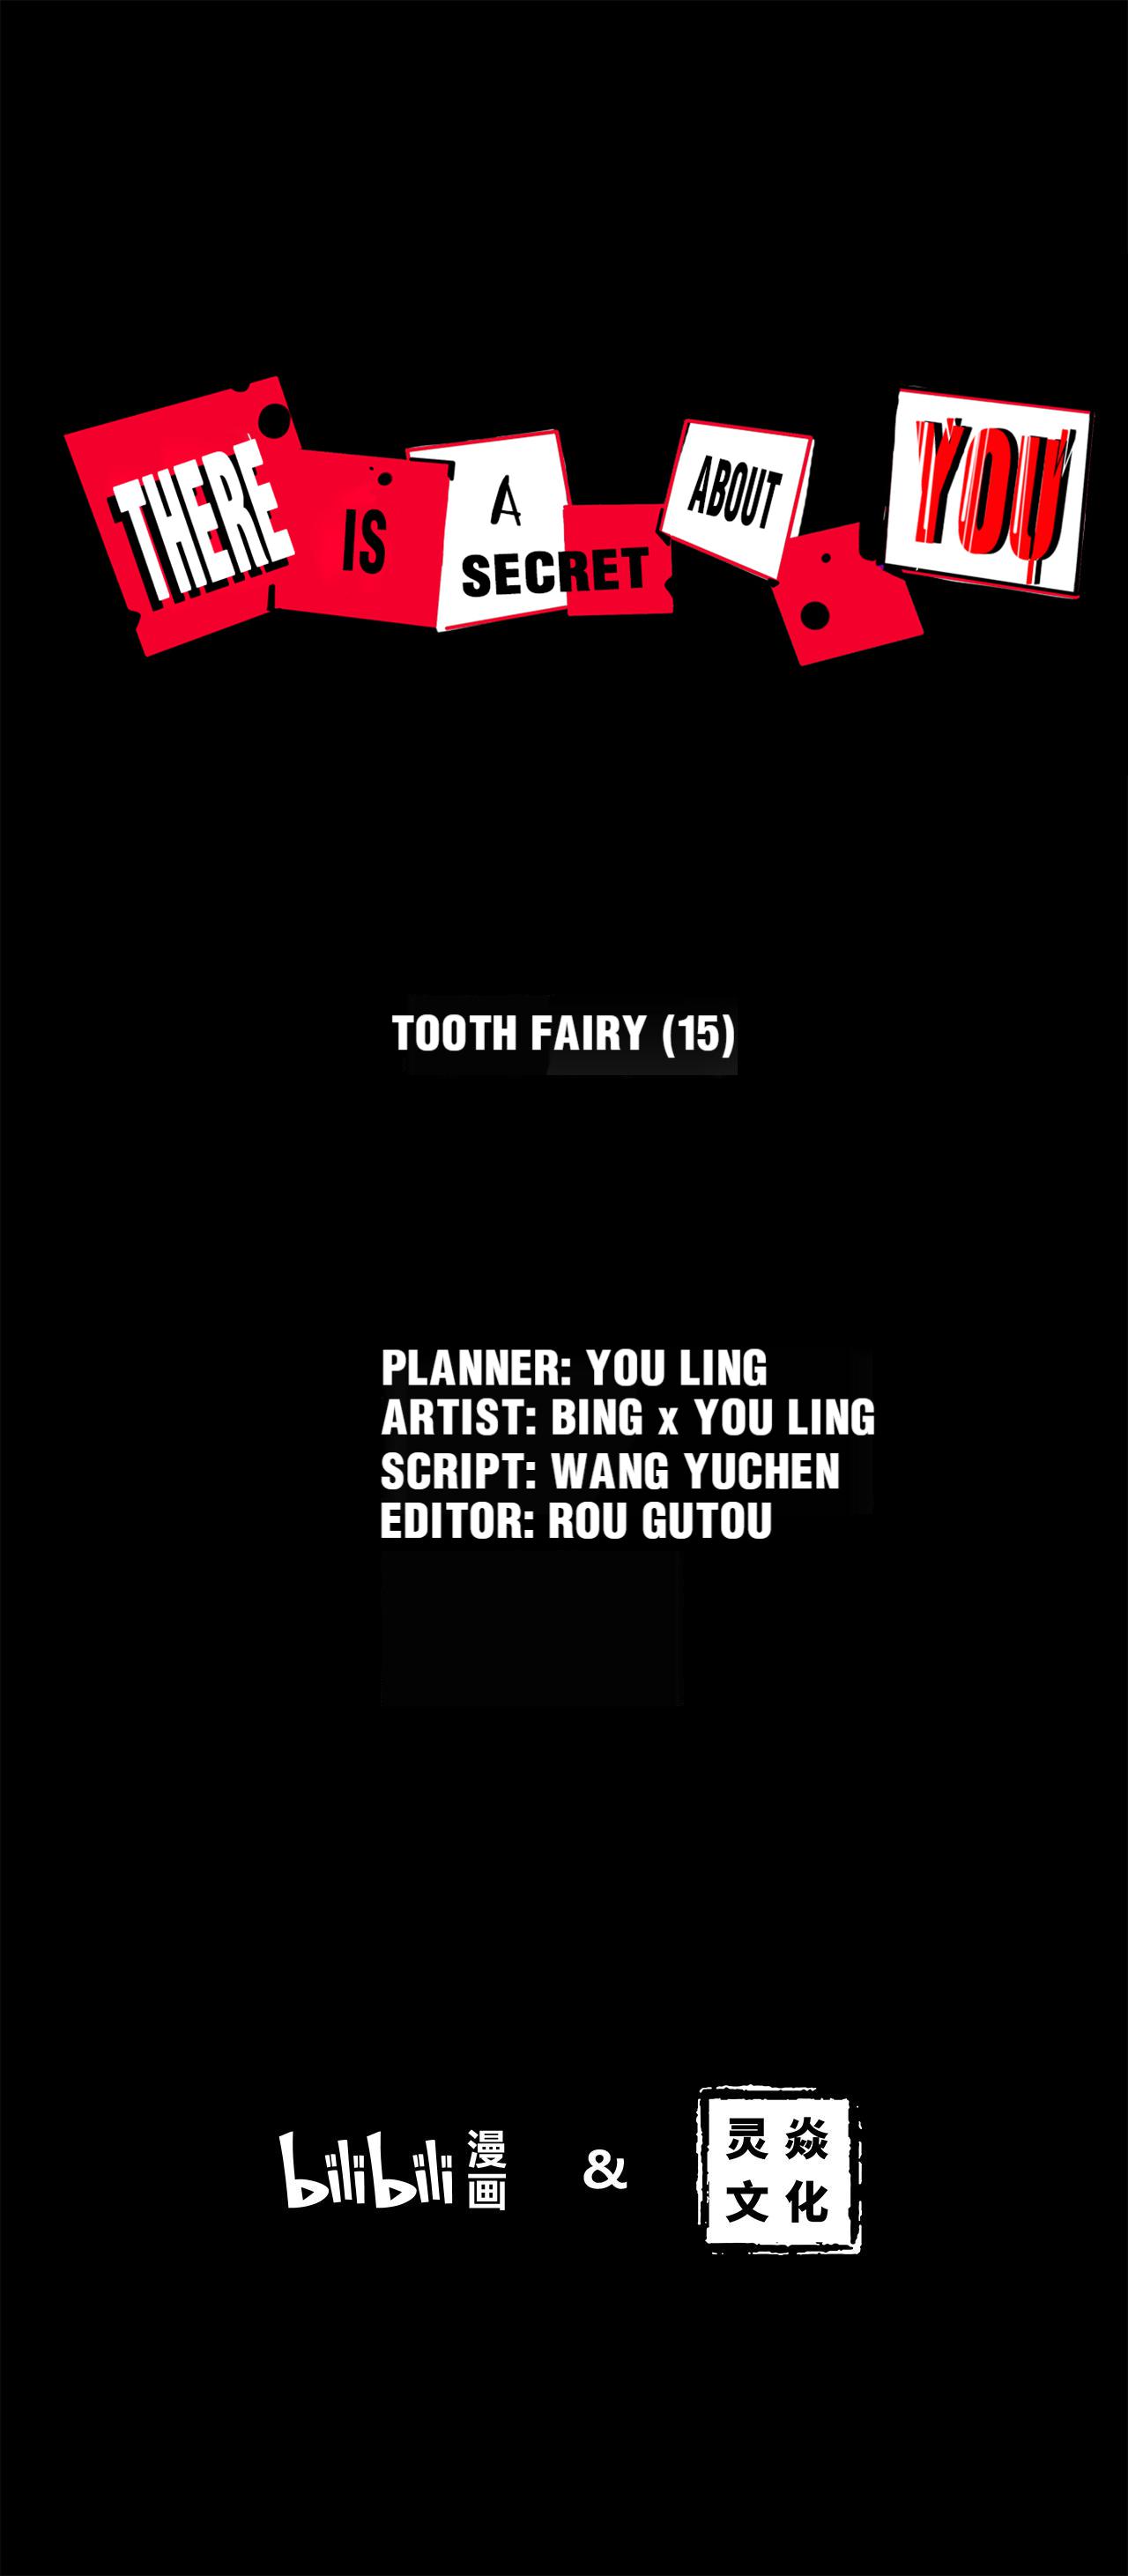 There is a Secret About You 15 Tooth Fairy (15)